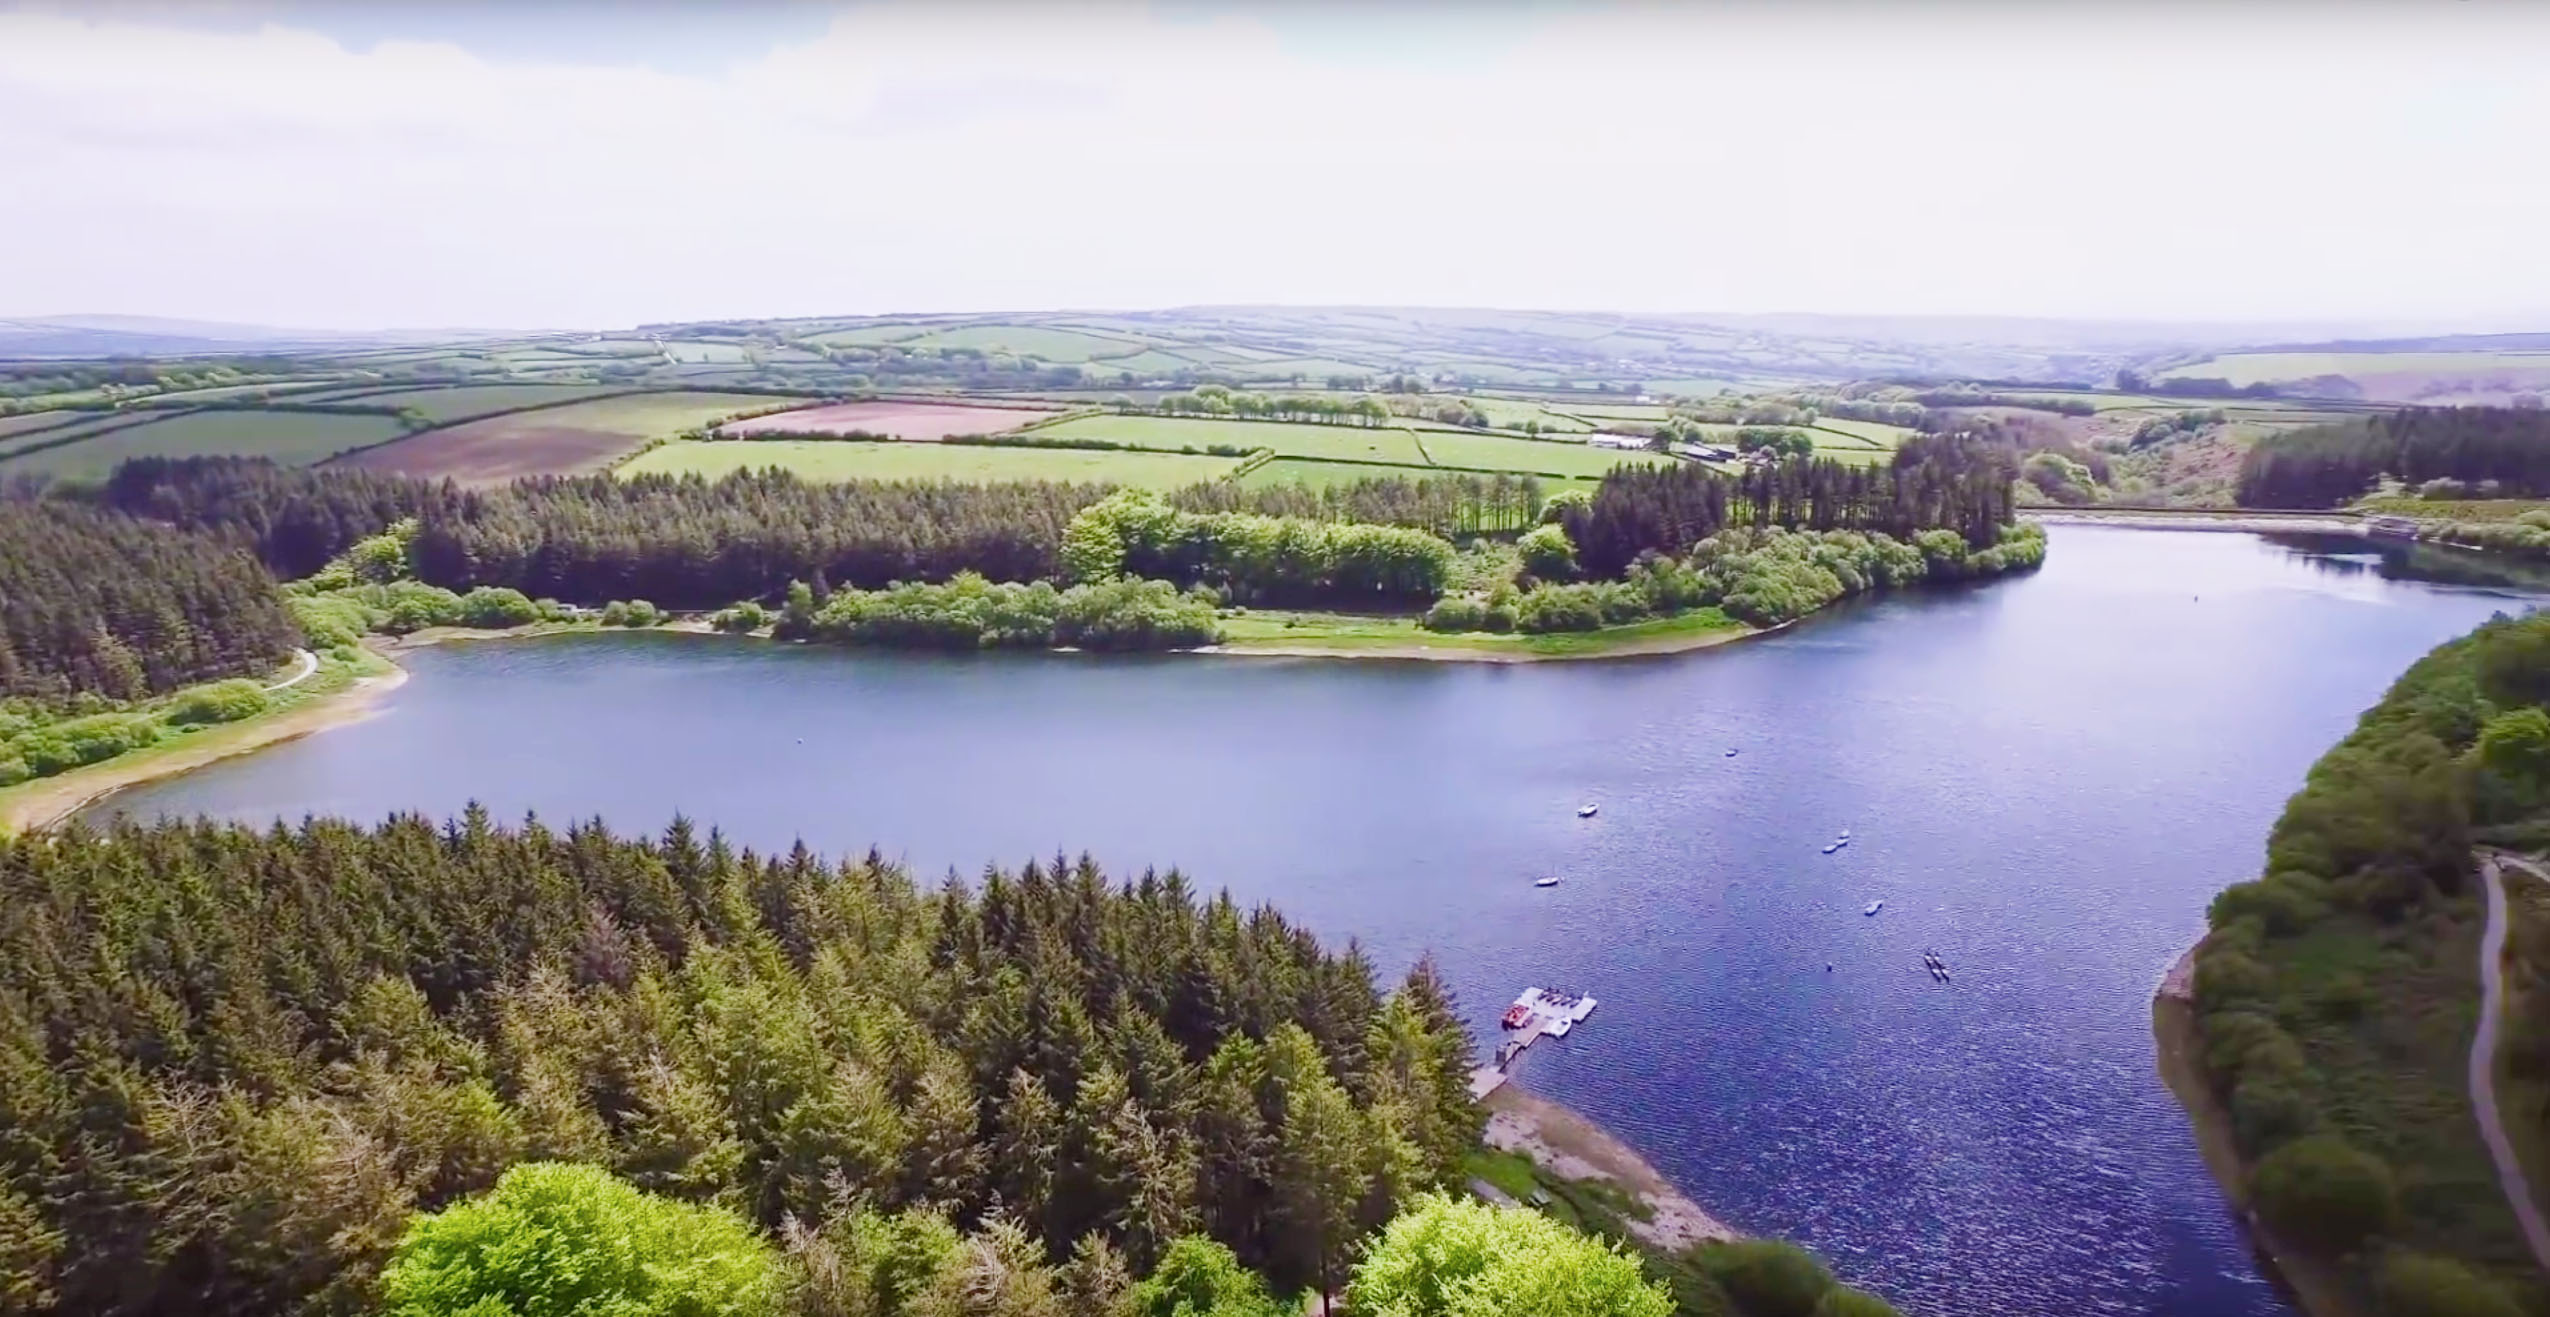 Ariel view of Wistlandpound Reservoir blue water surrounded by green countryside